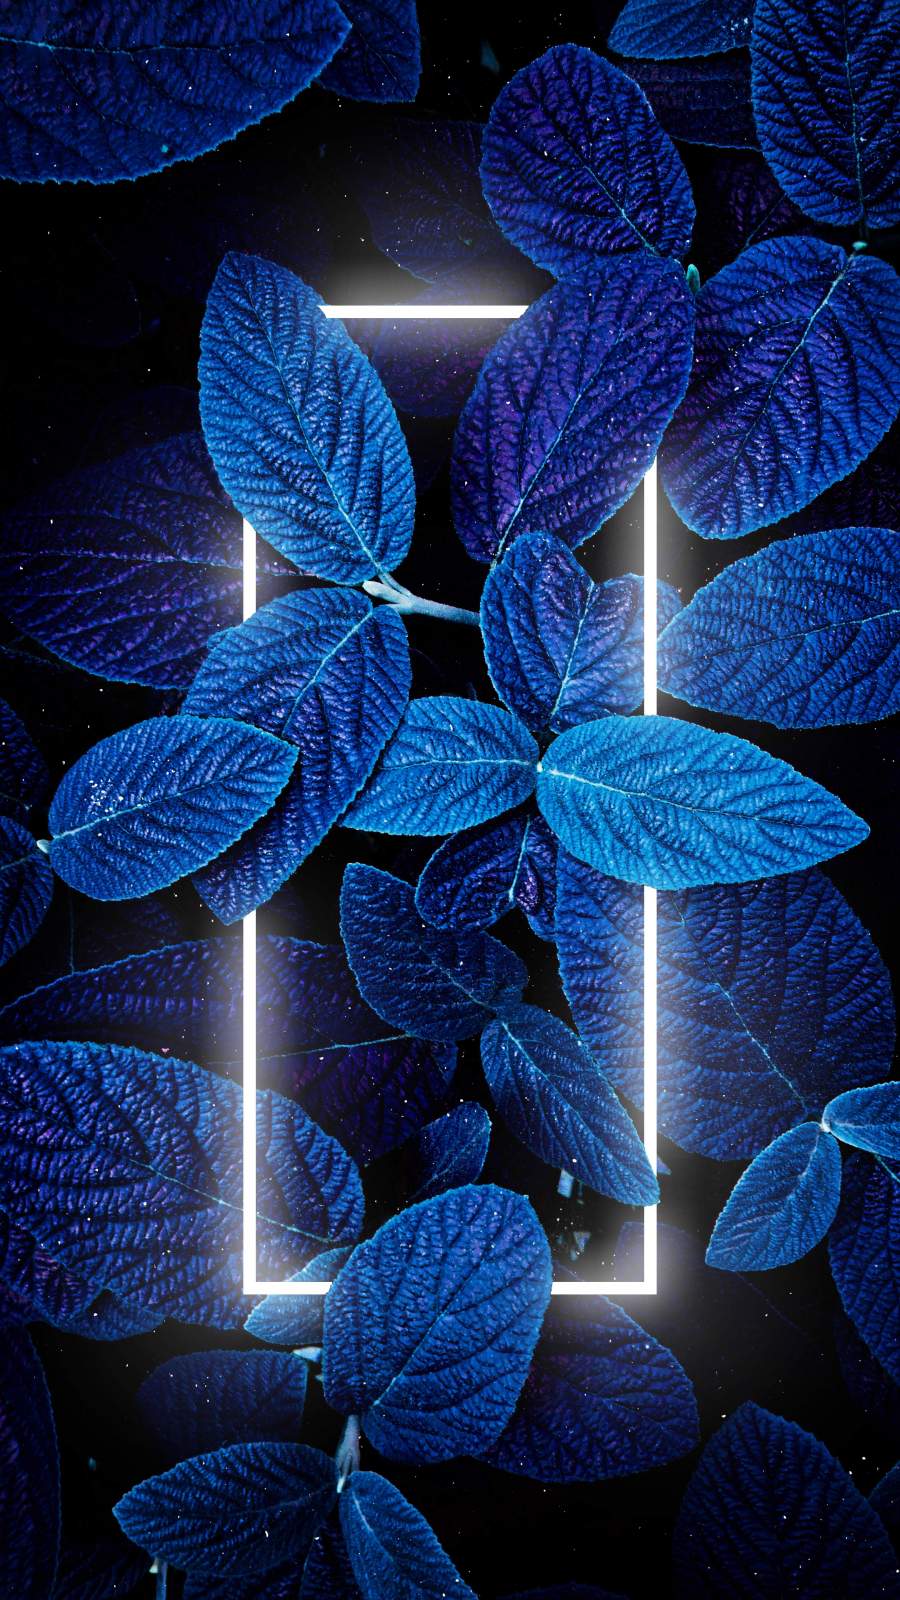 Blue Nature - IPhone Wallpapers : iPhone Wallpapers